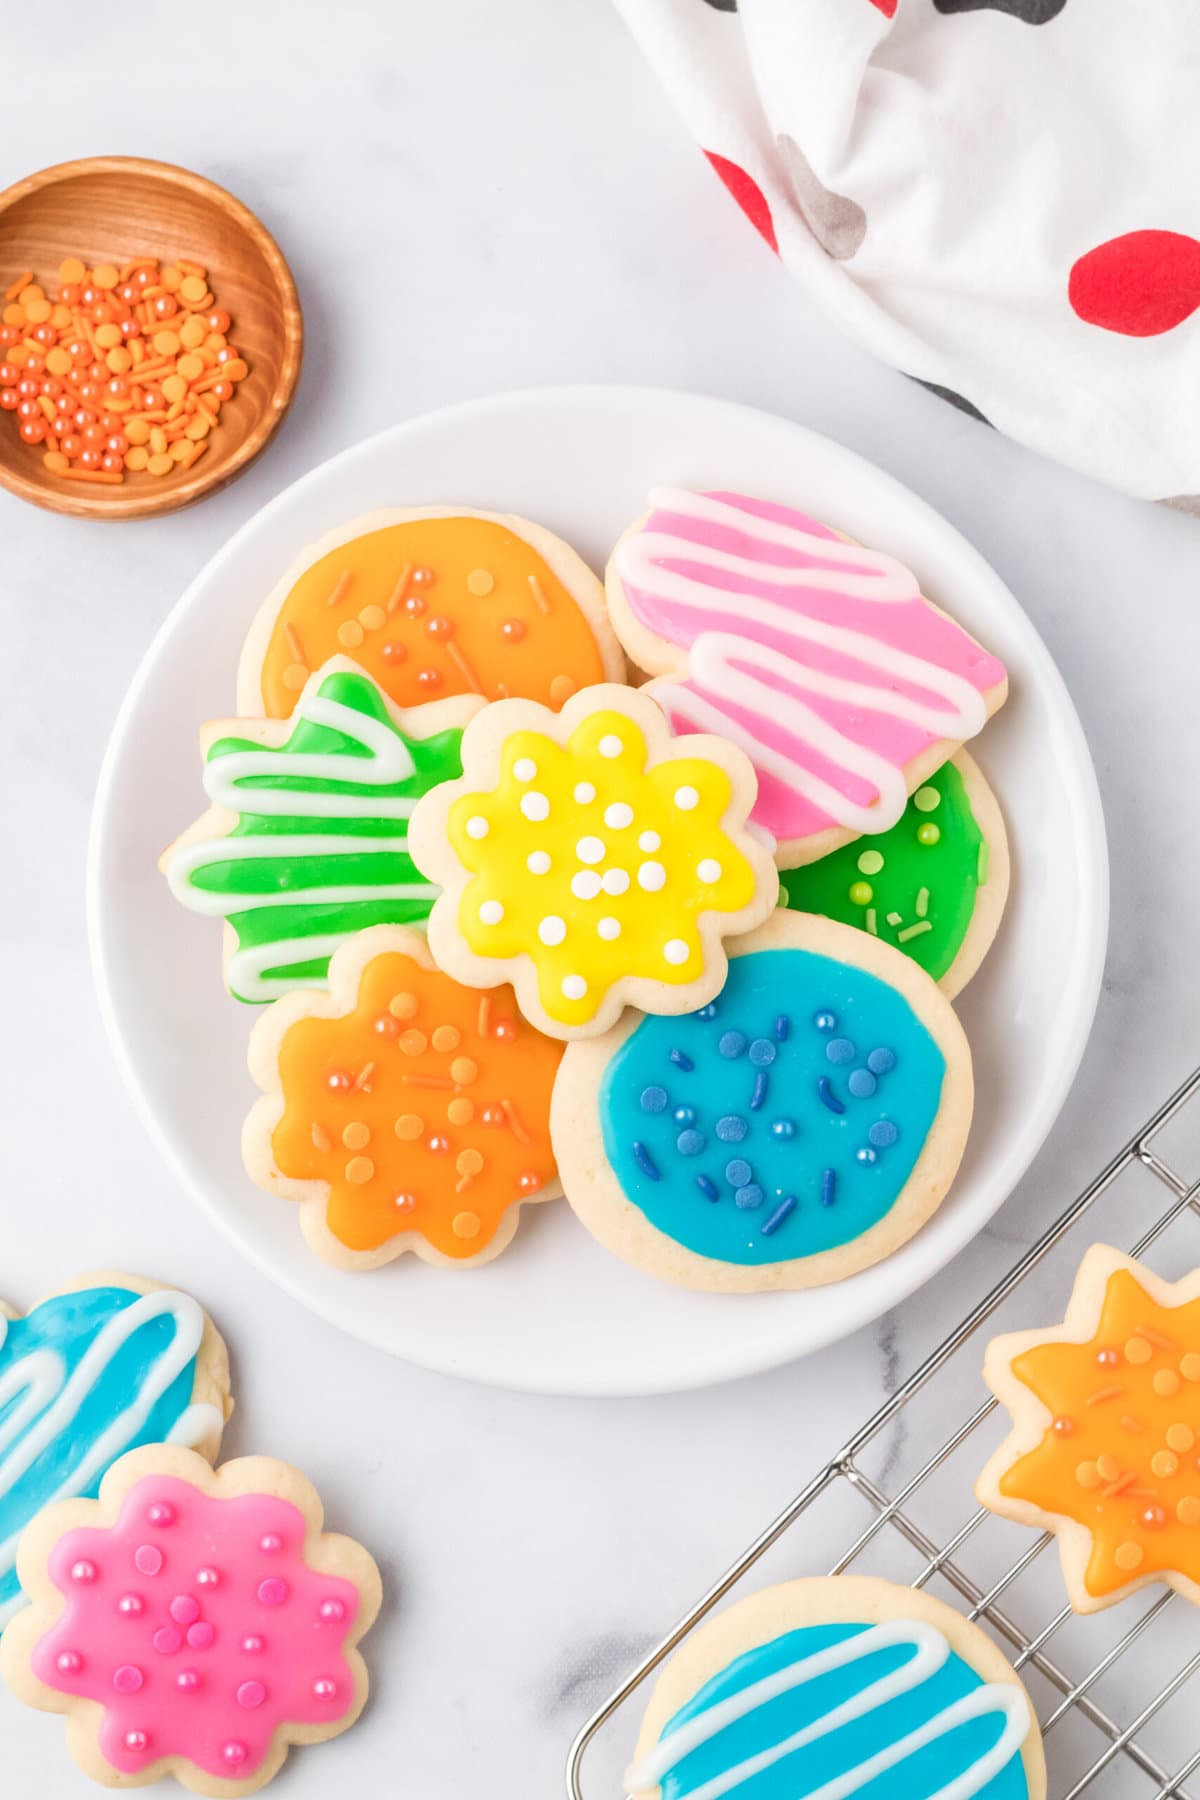 Overhead view of a plate of iced sugar cookies